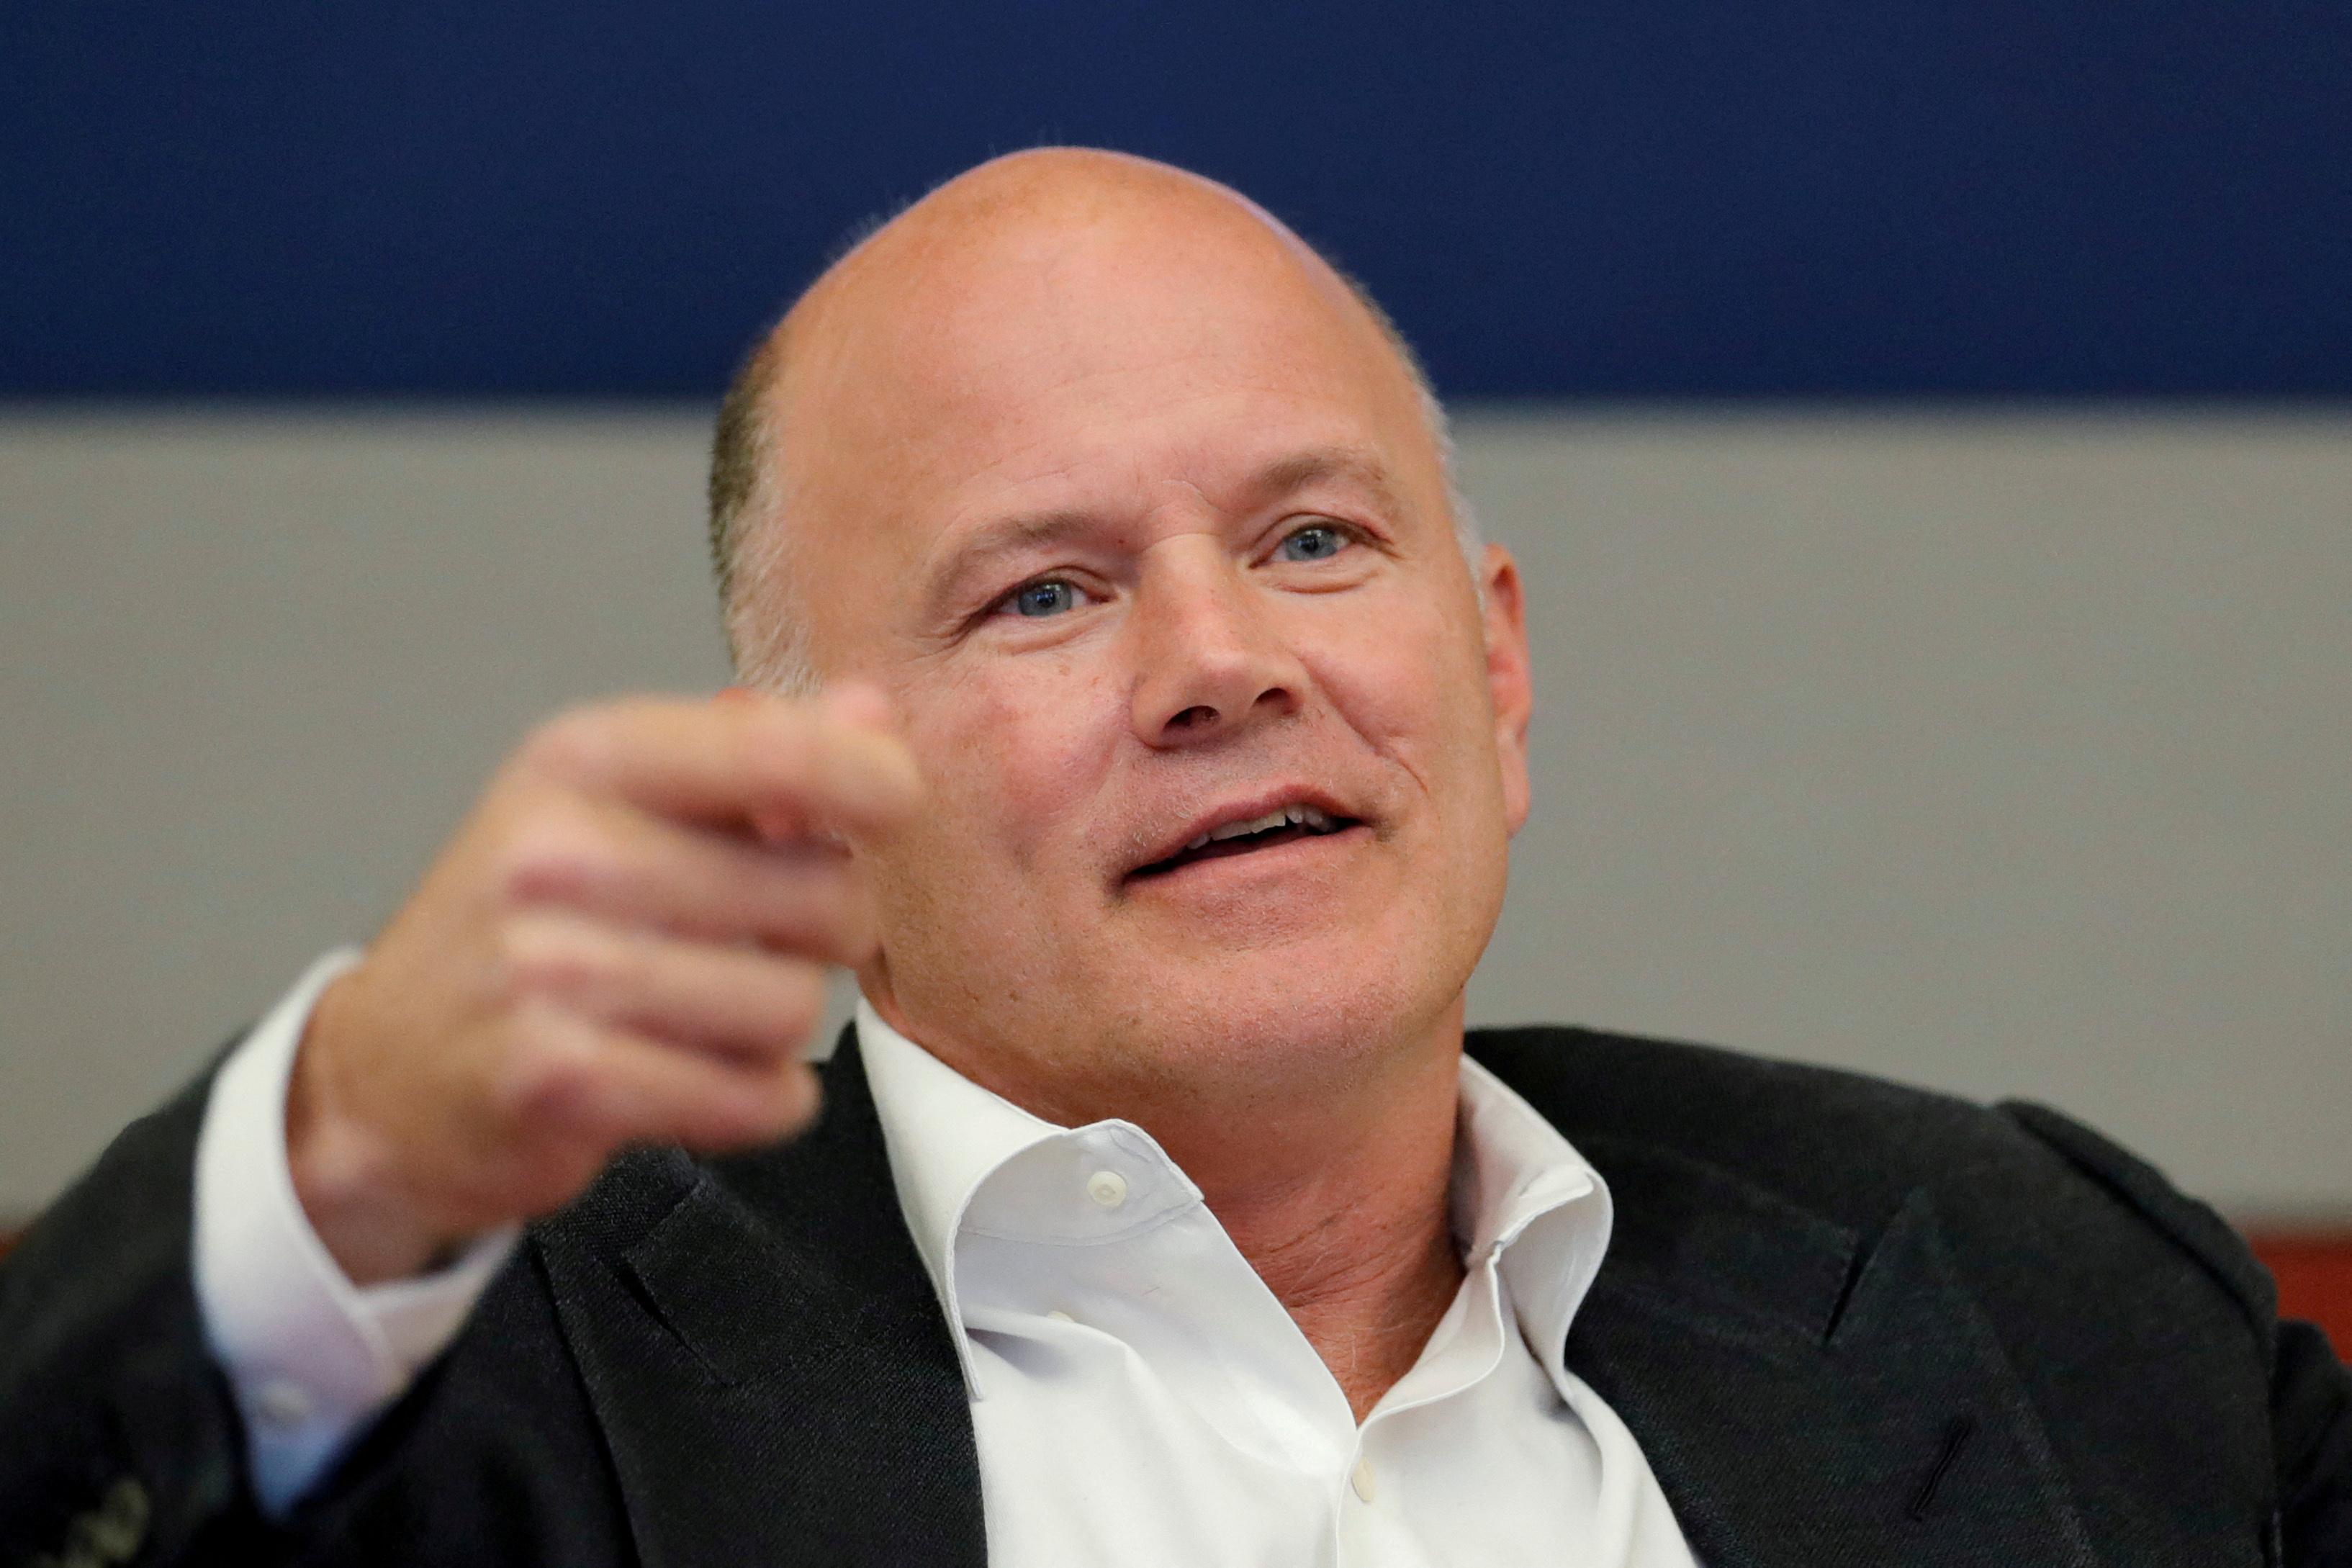 Mike Novogratz, Galaxy Digital founder, speaks during a Reuters investment summit in New York City